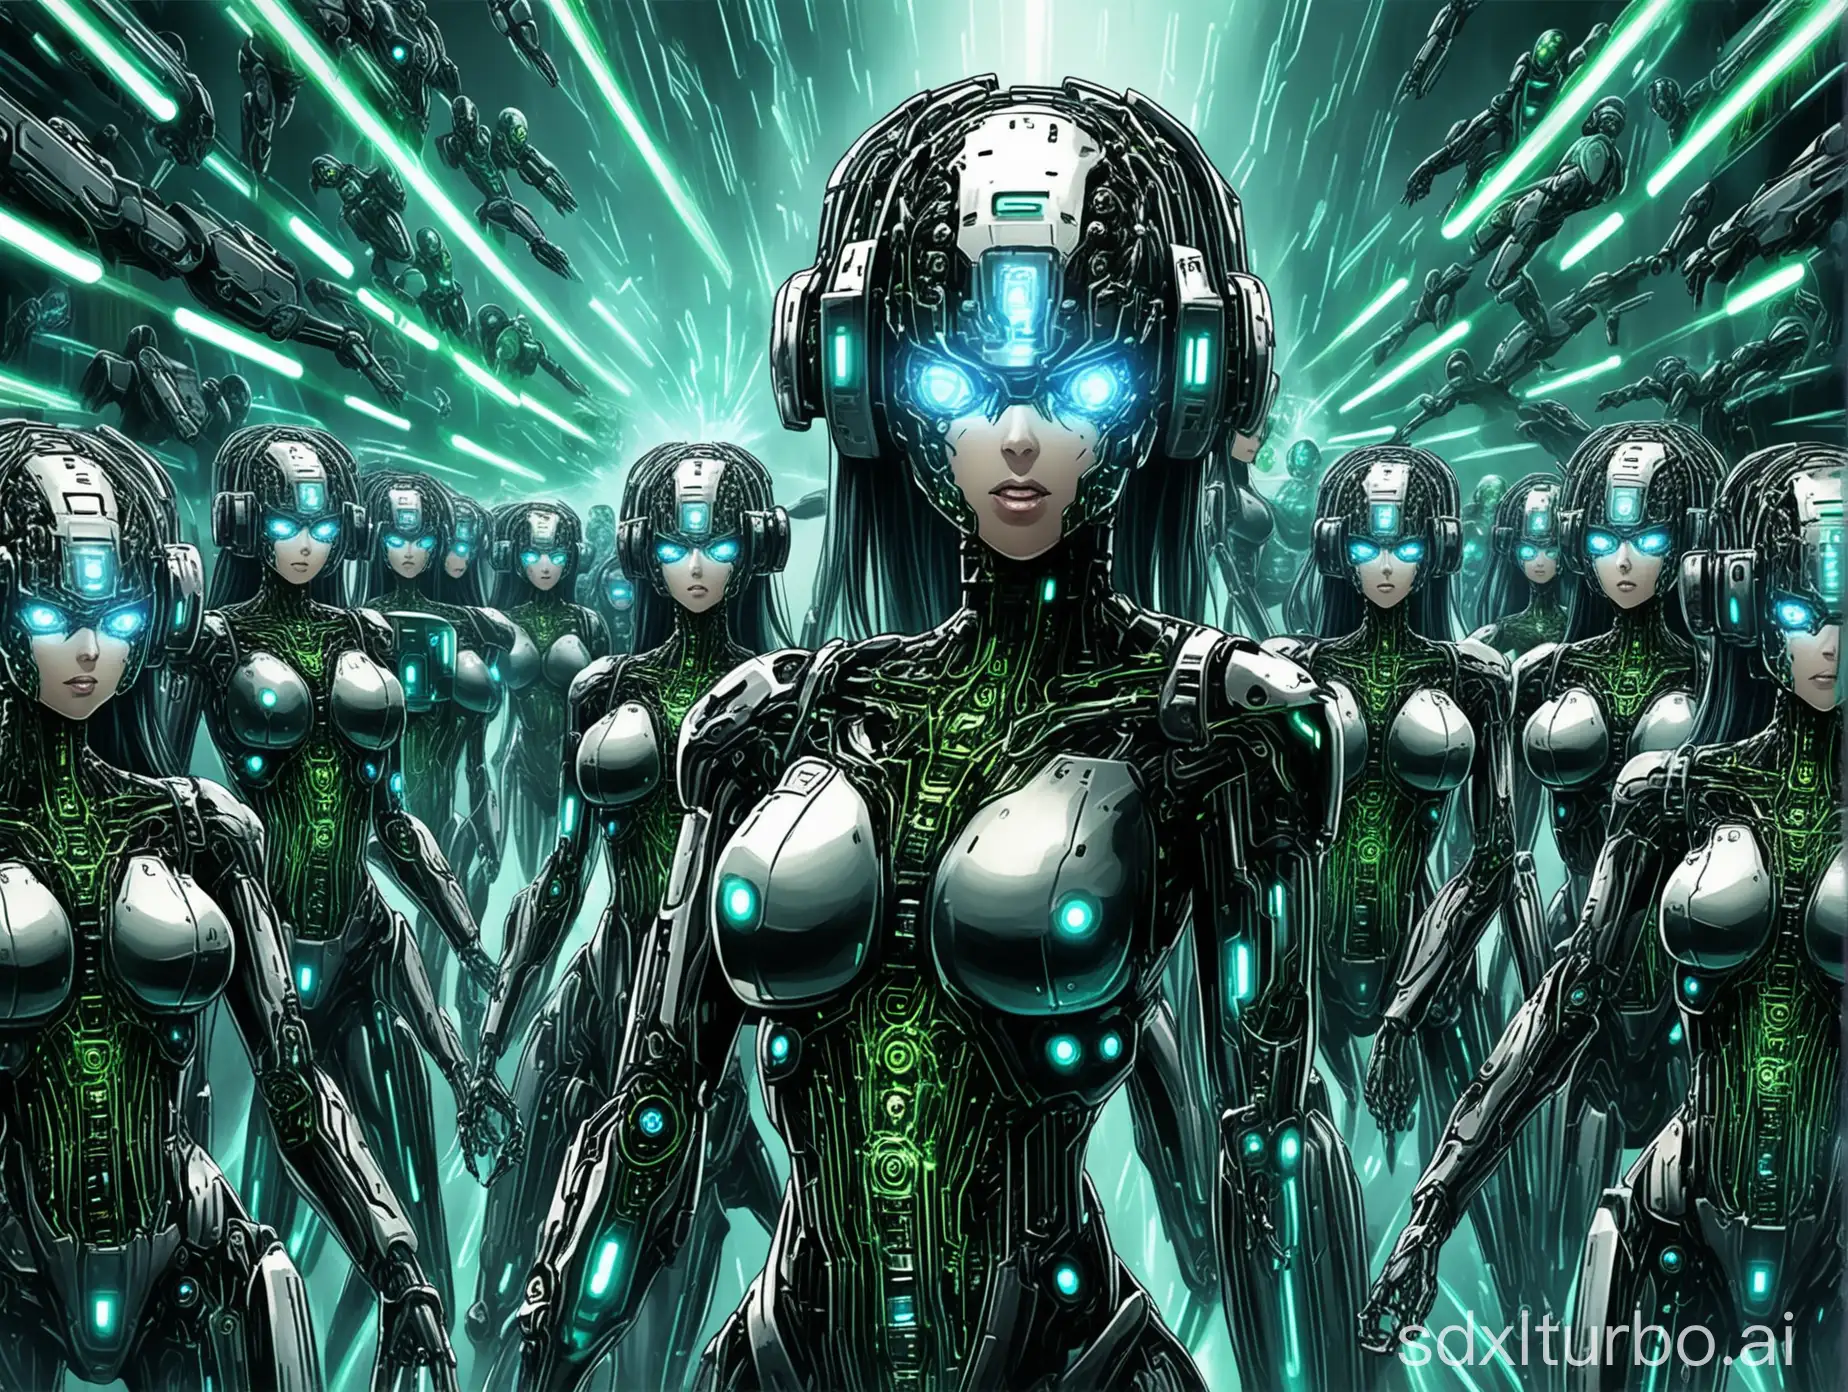 army of serious anime style borg girls, with cybernetic face implants, equipped with energy shields, fighting a battle with futuristic human soldiers